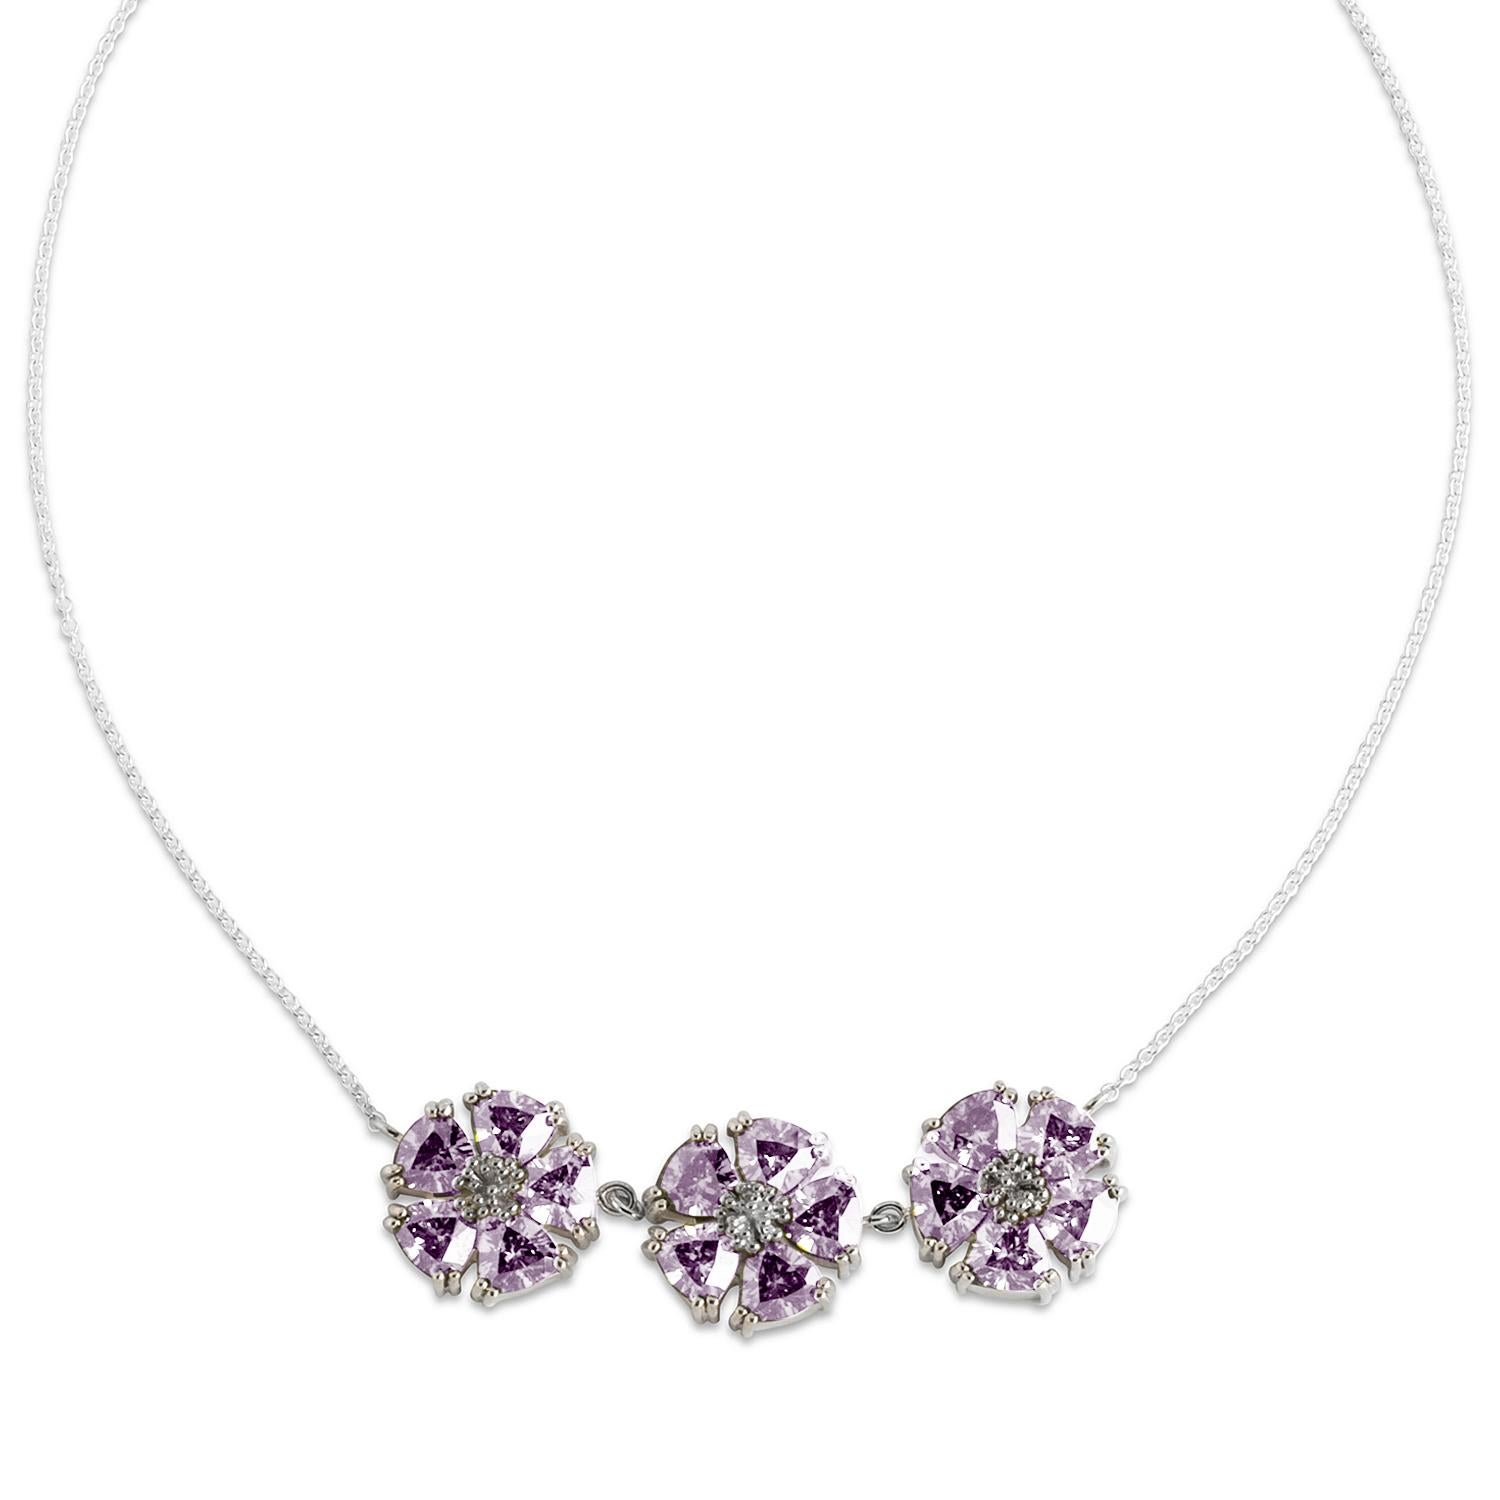 Designed in NYC

.925 Sterling Silver 15 x 7 mm Amethyst 123 Blossom Stone Necklace. No matter the season, allow natural beauty to surround you wherever you go. 123 blossom stone necklace: 

Sterling silver 
High-polish finish
Medium-weight 
16 - 18